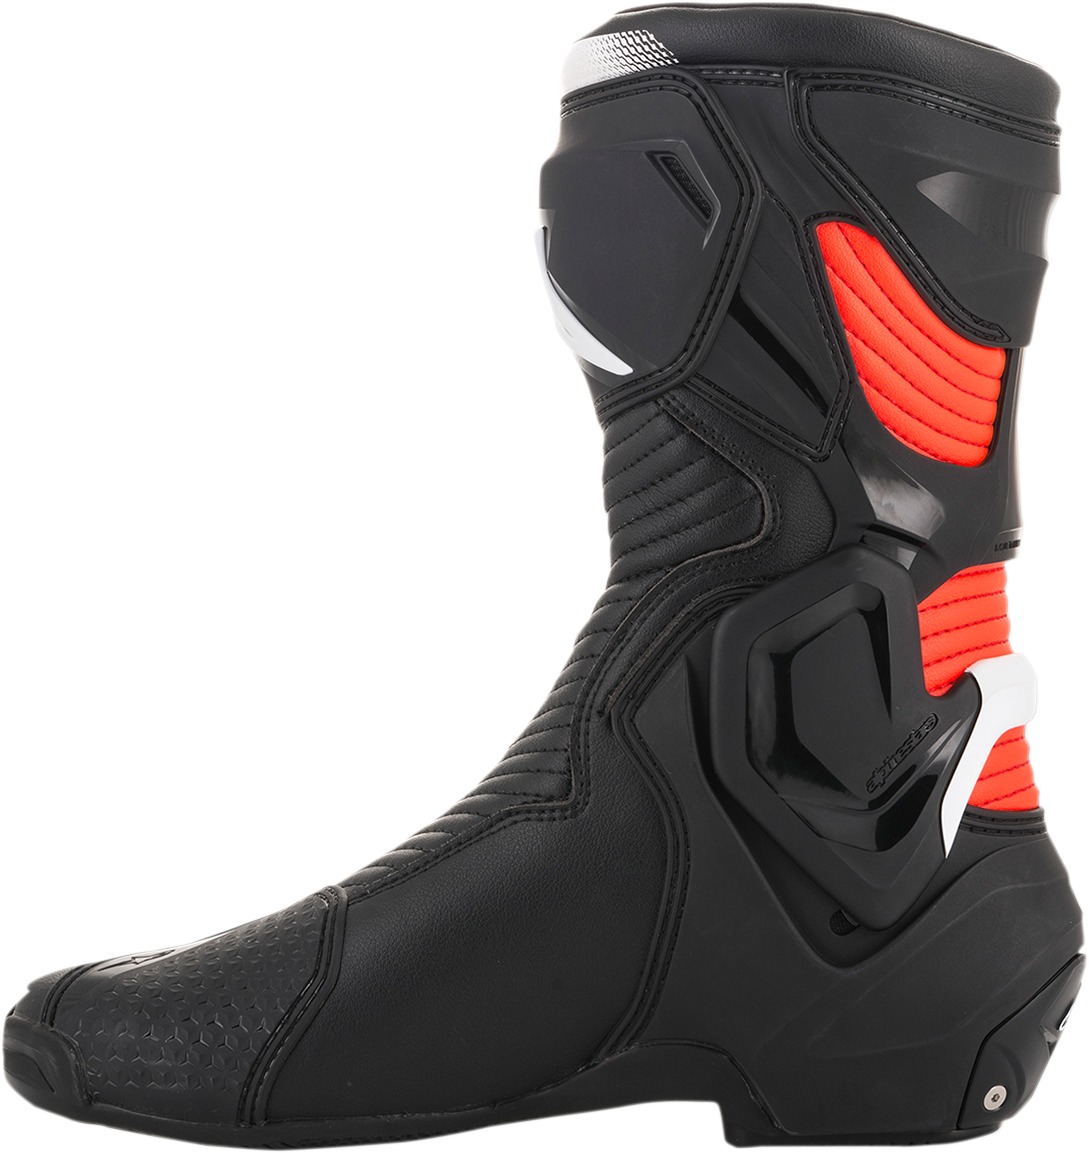 SMX Plus Street Riding Boots Black/Red/White US 12 - Click Image to Close